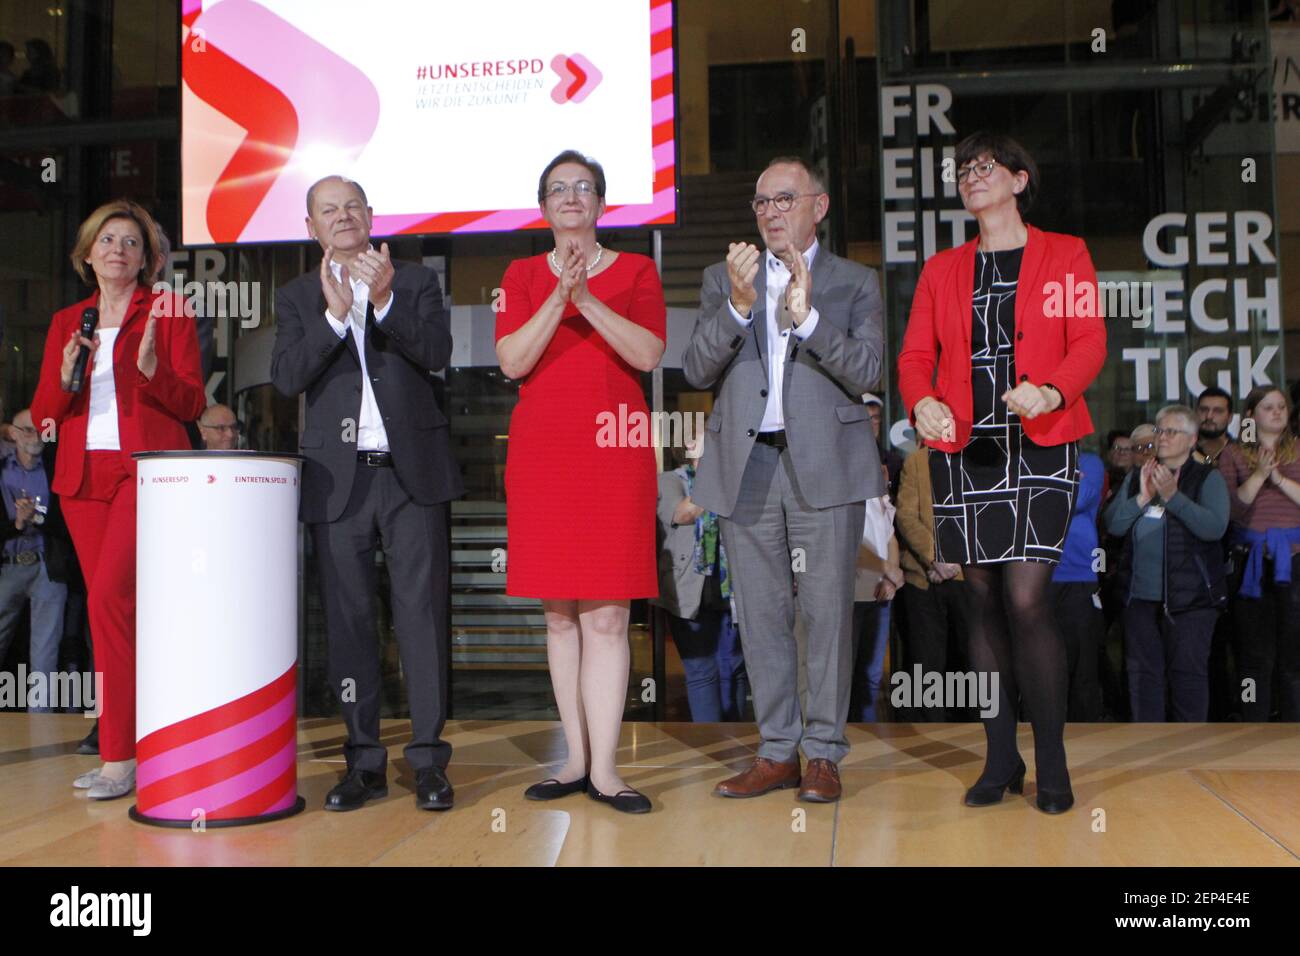 (10/26/2019) The SPD members elect Federal Finance Minister Olaf Scholz and Klara Geywitz just ahead of Norbert Walter-Borjans and Saskia Esken for the SPD presidency. The race for the SPD presidency goes into the runoff election in November: the two candidates will then be elected at the party congress. (Photo by Simone Kuhlmey/Pacific Press/Sipa USA) Stock Photo